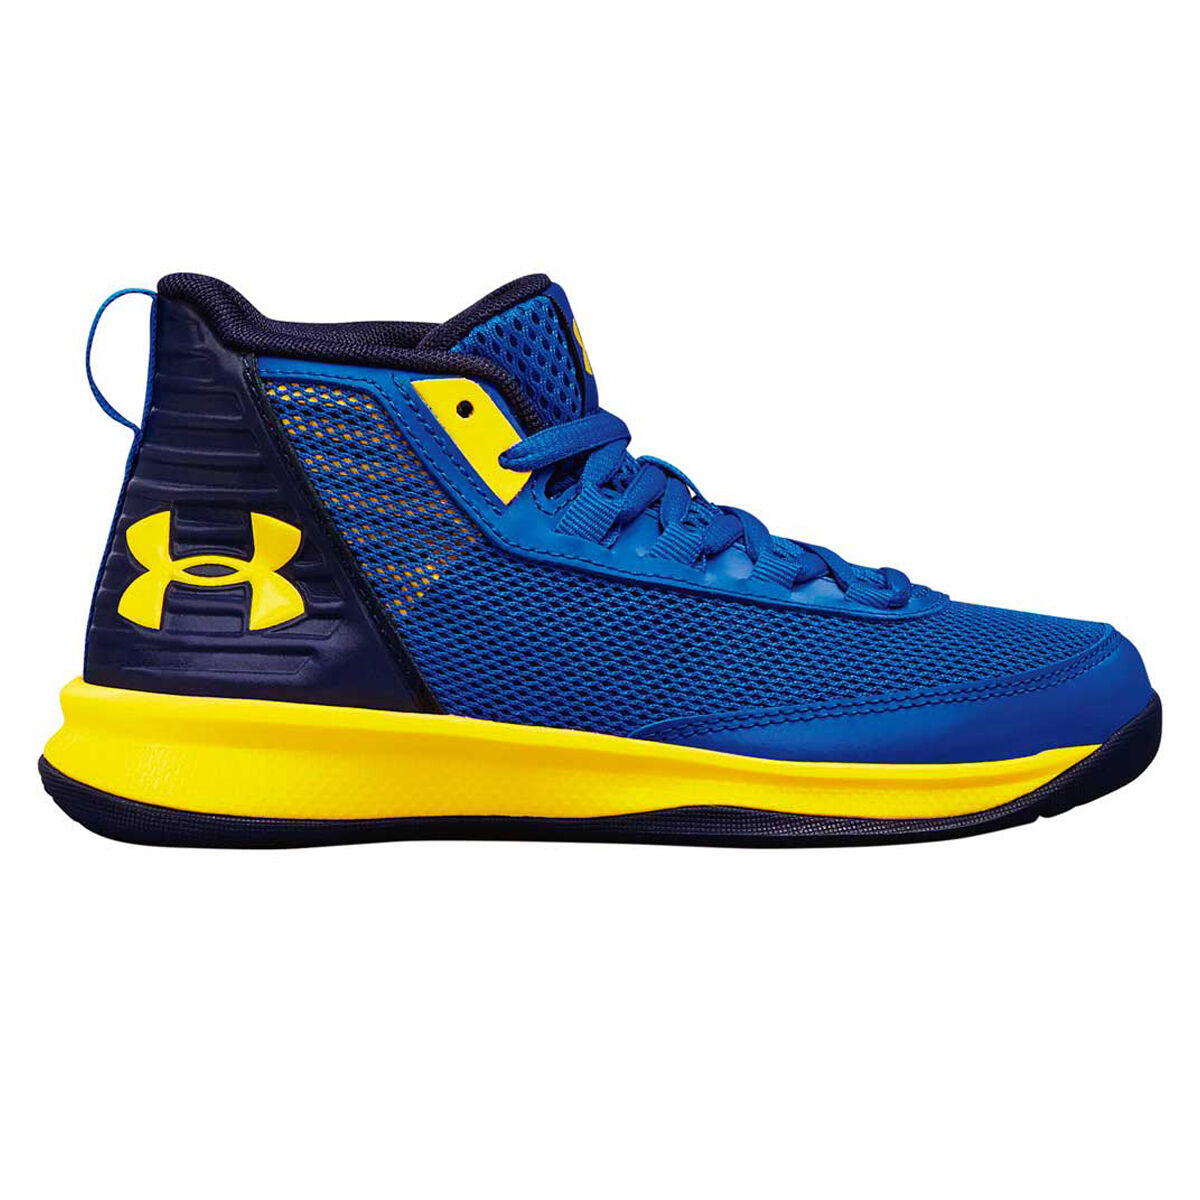 under armour 2018 basketball shoes